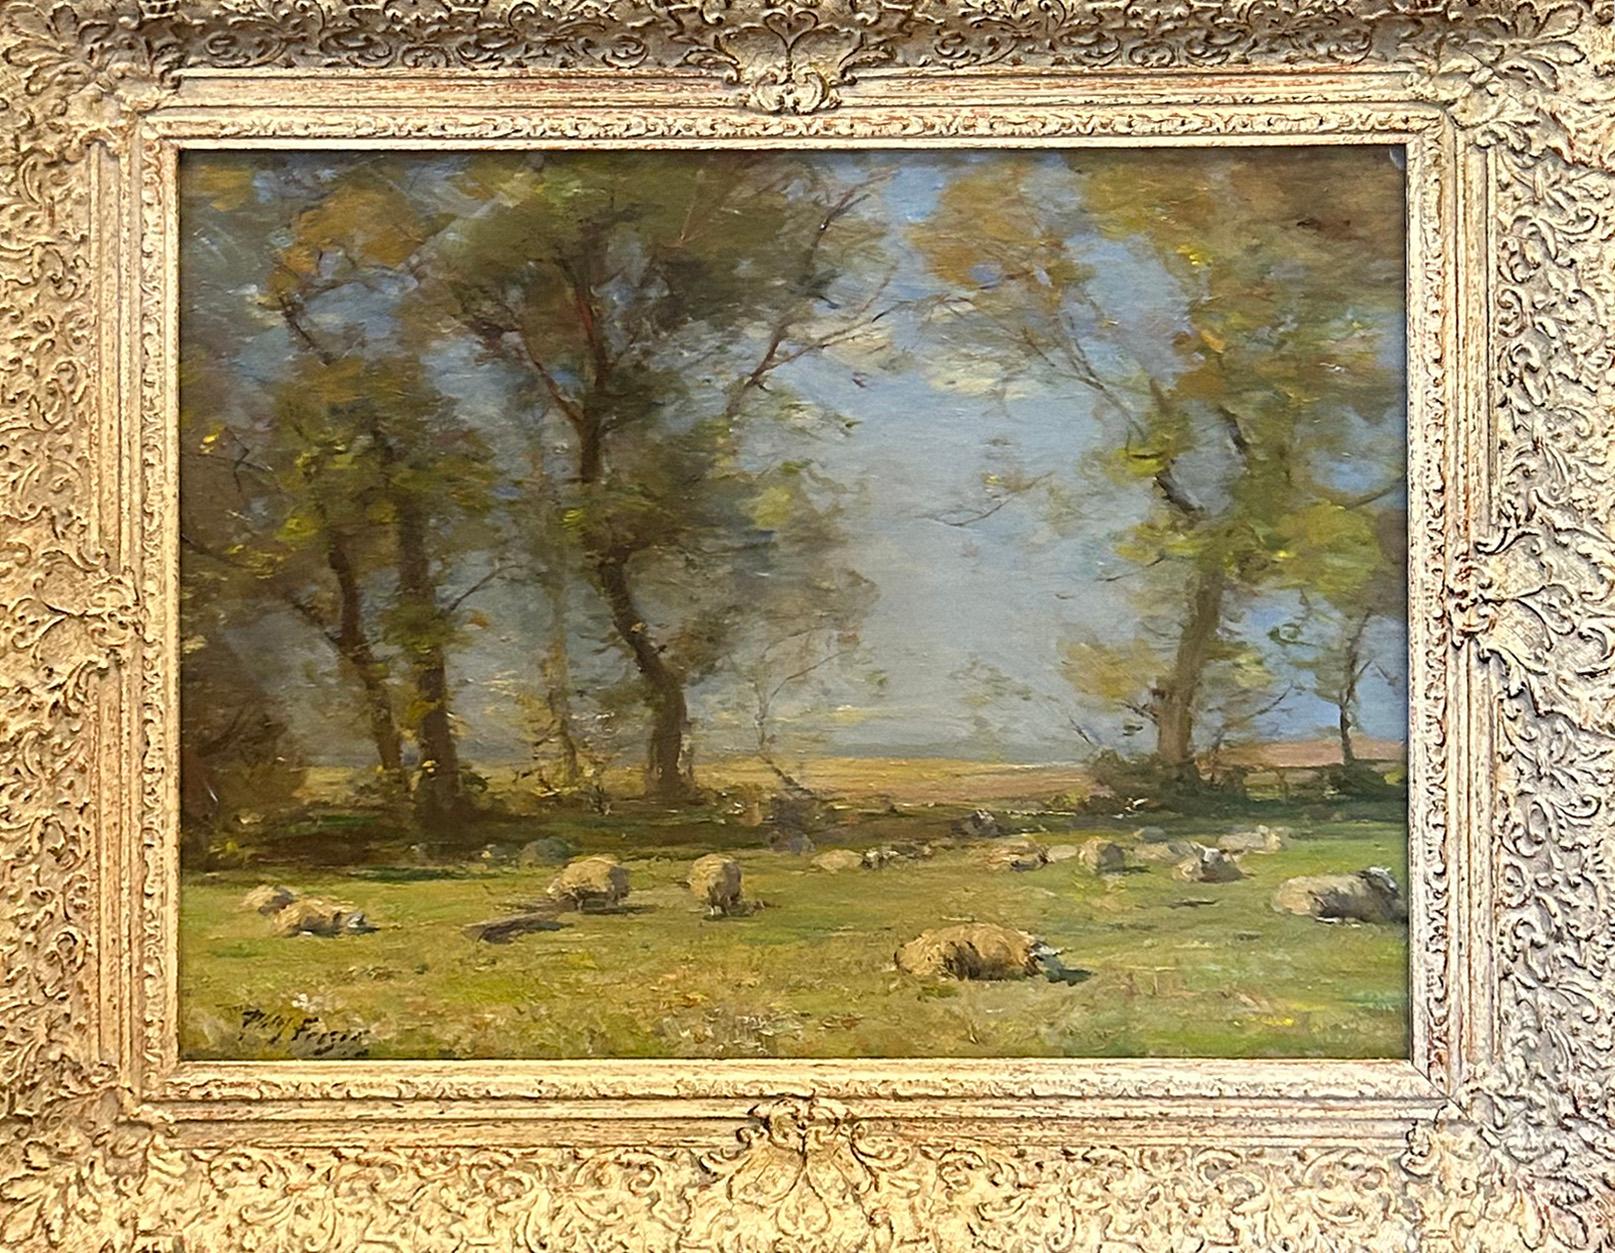 A Summer's Day, impressionist, early 20th century, oil on canvas - Painting by William Miller Frazer